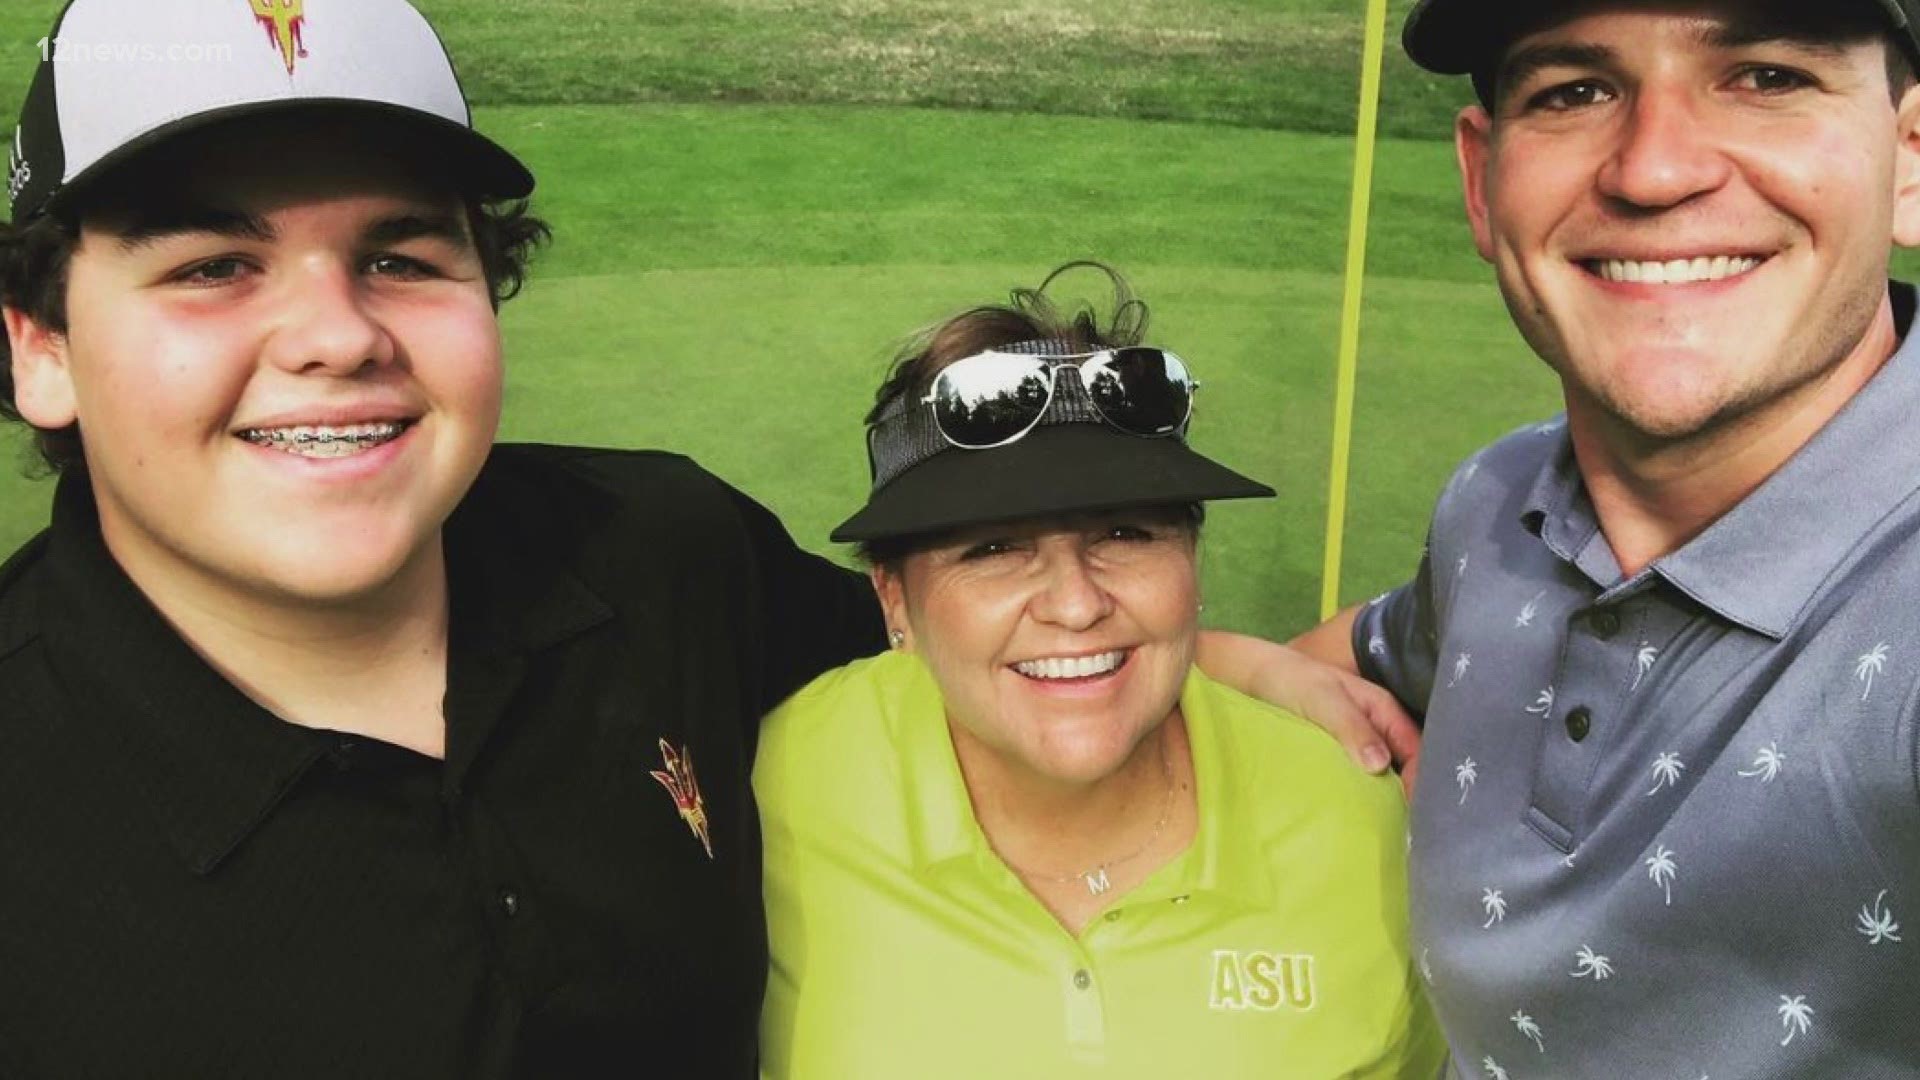 ASU women's golf coach Missy Farr-Kaye is a Valley golf legend and a fighter. She beat breast cancer twice and is now fighting colon cancer.